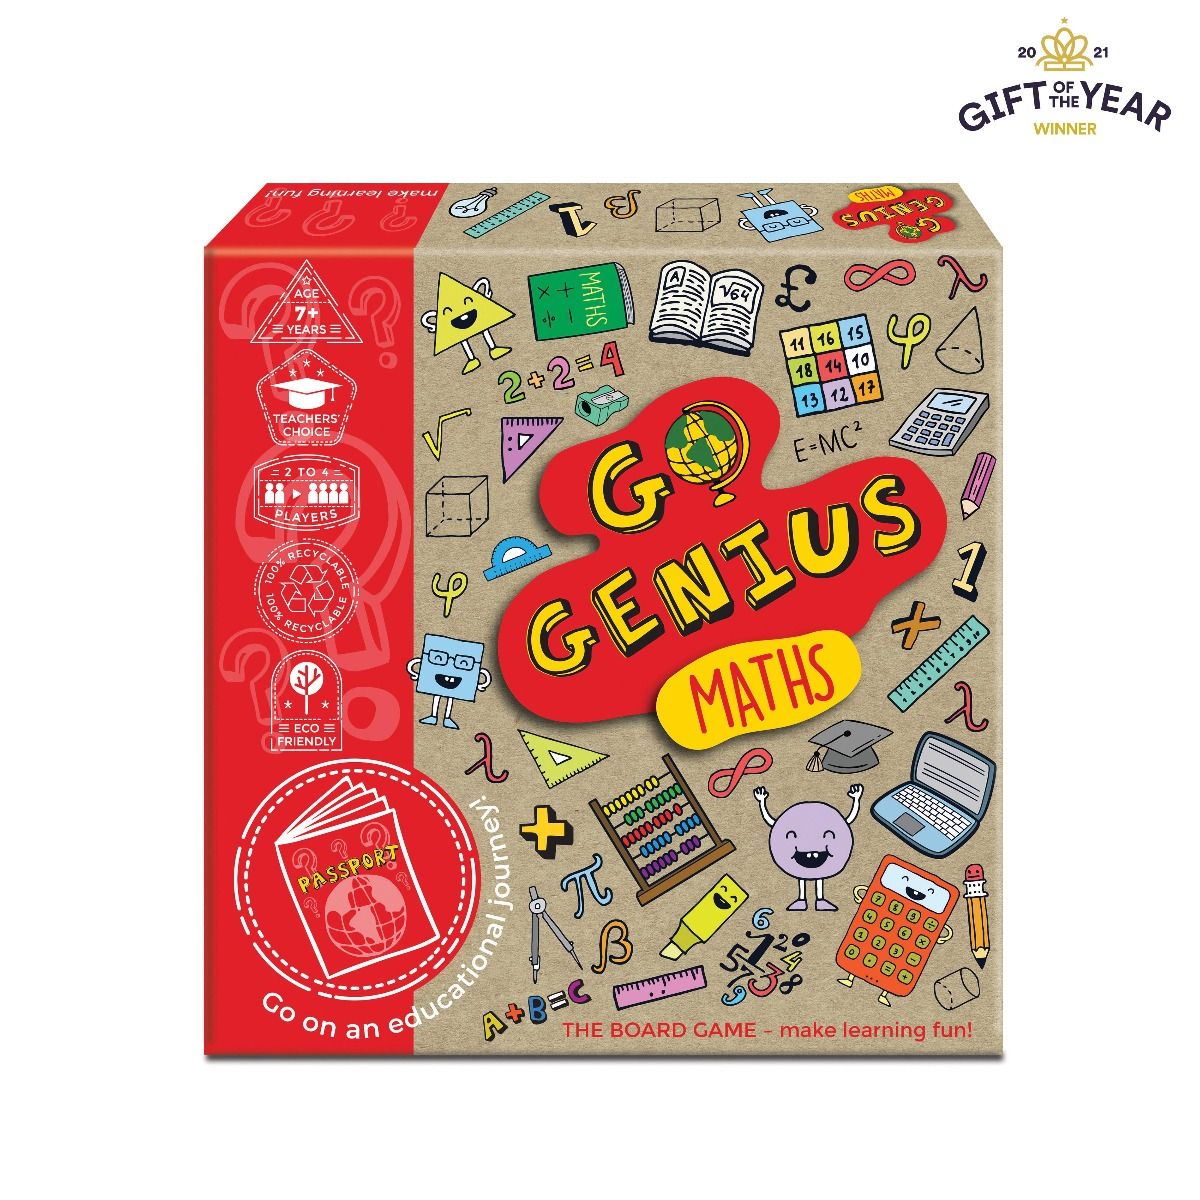 Go Genius Maths - The Board Game - Gifts R Us